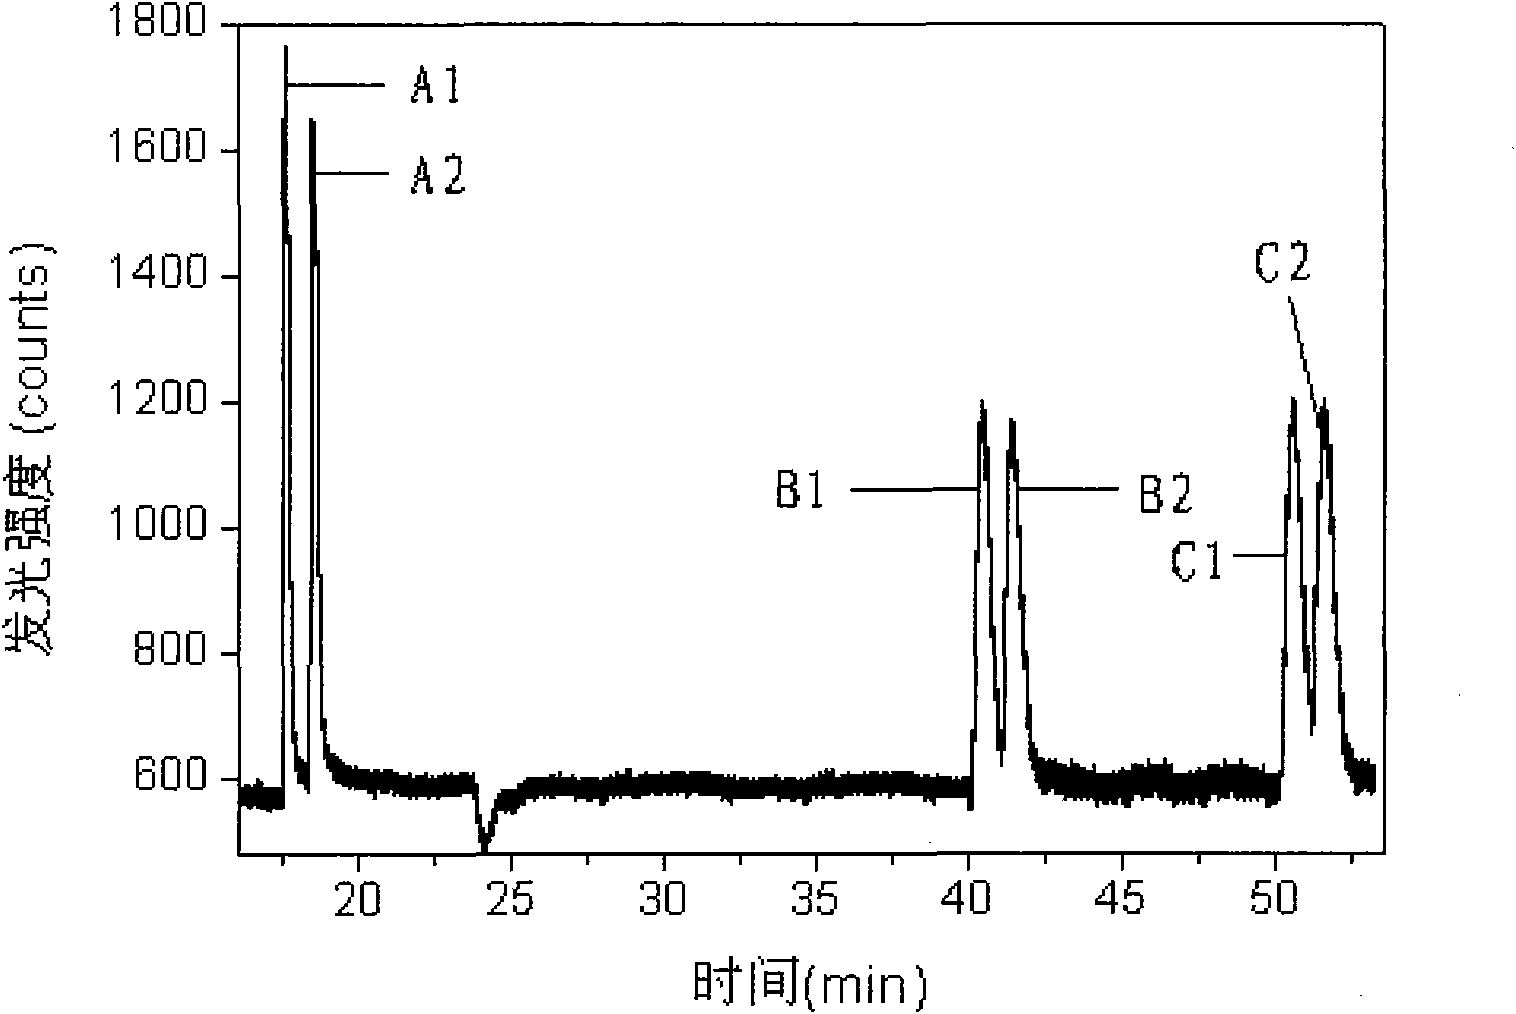 Method for simultaneously carrying out chiral separation analysis on anisodamine, atenolol and metoprolol